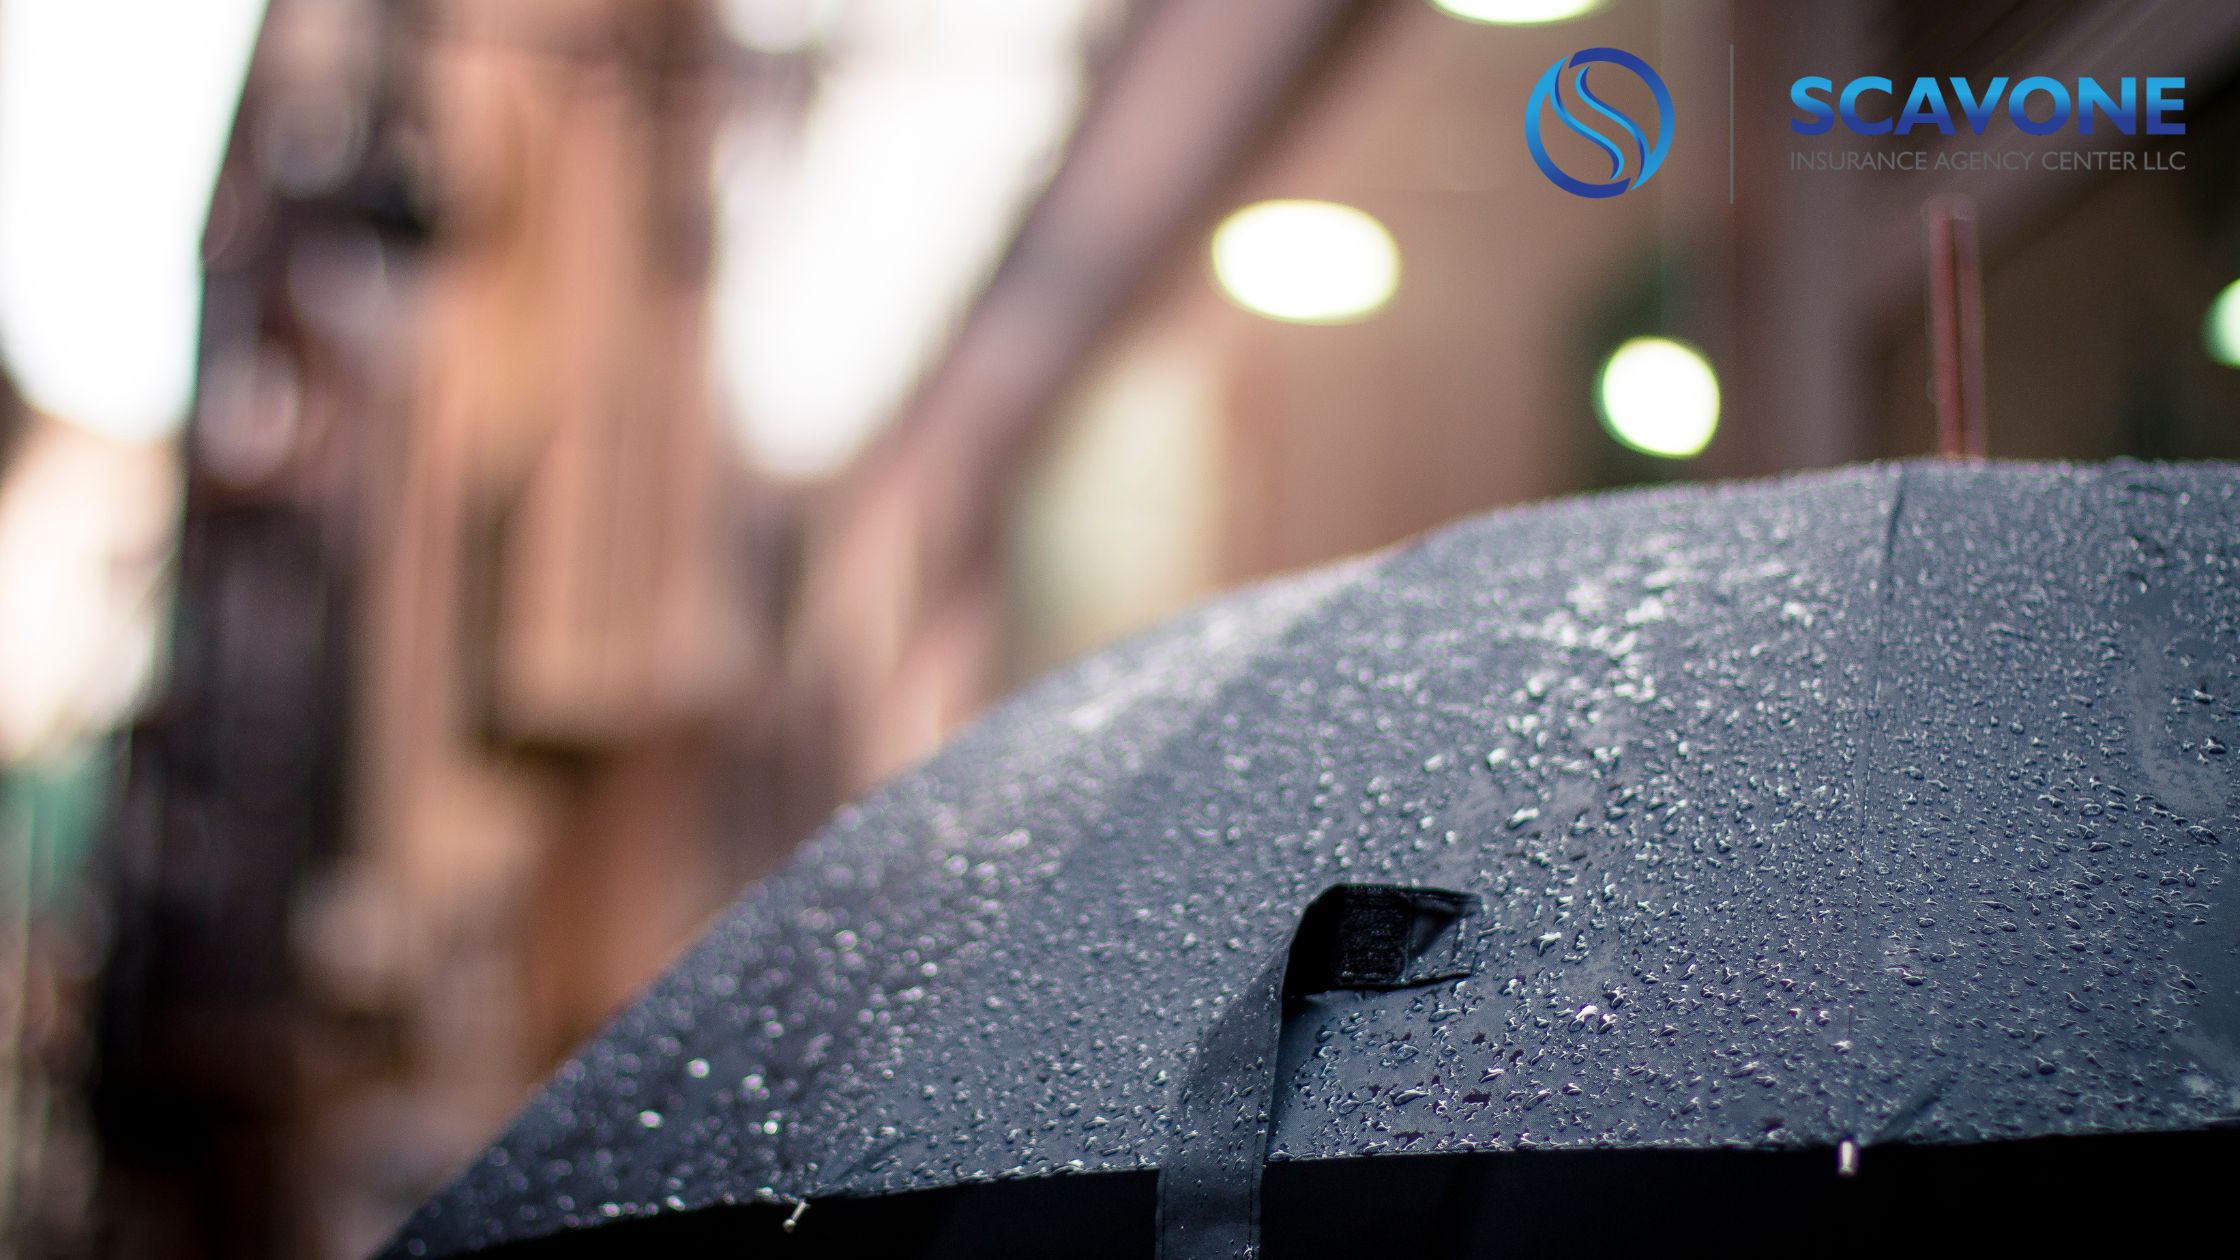 Umbrella Insurance: How It Works & What It Covers